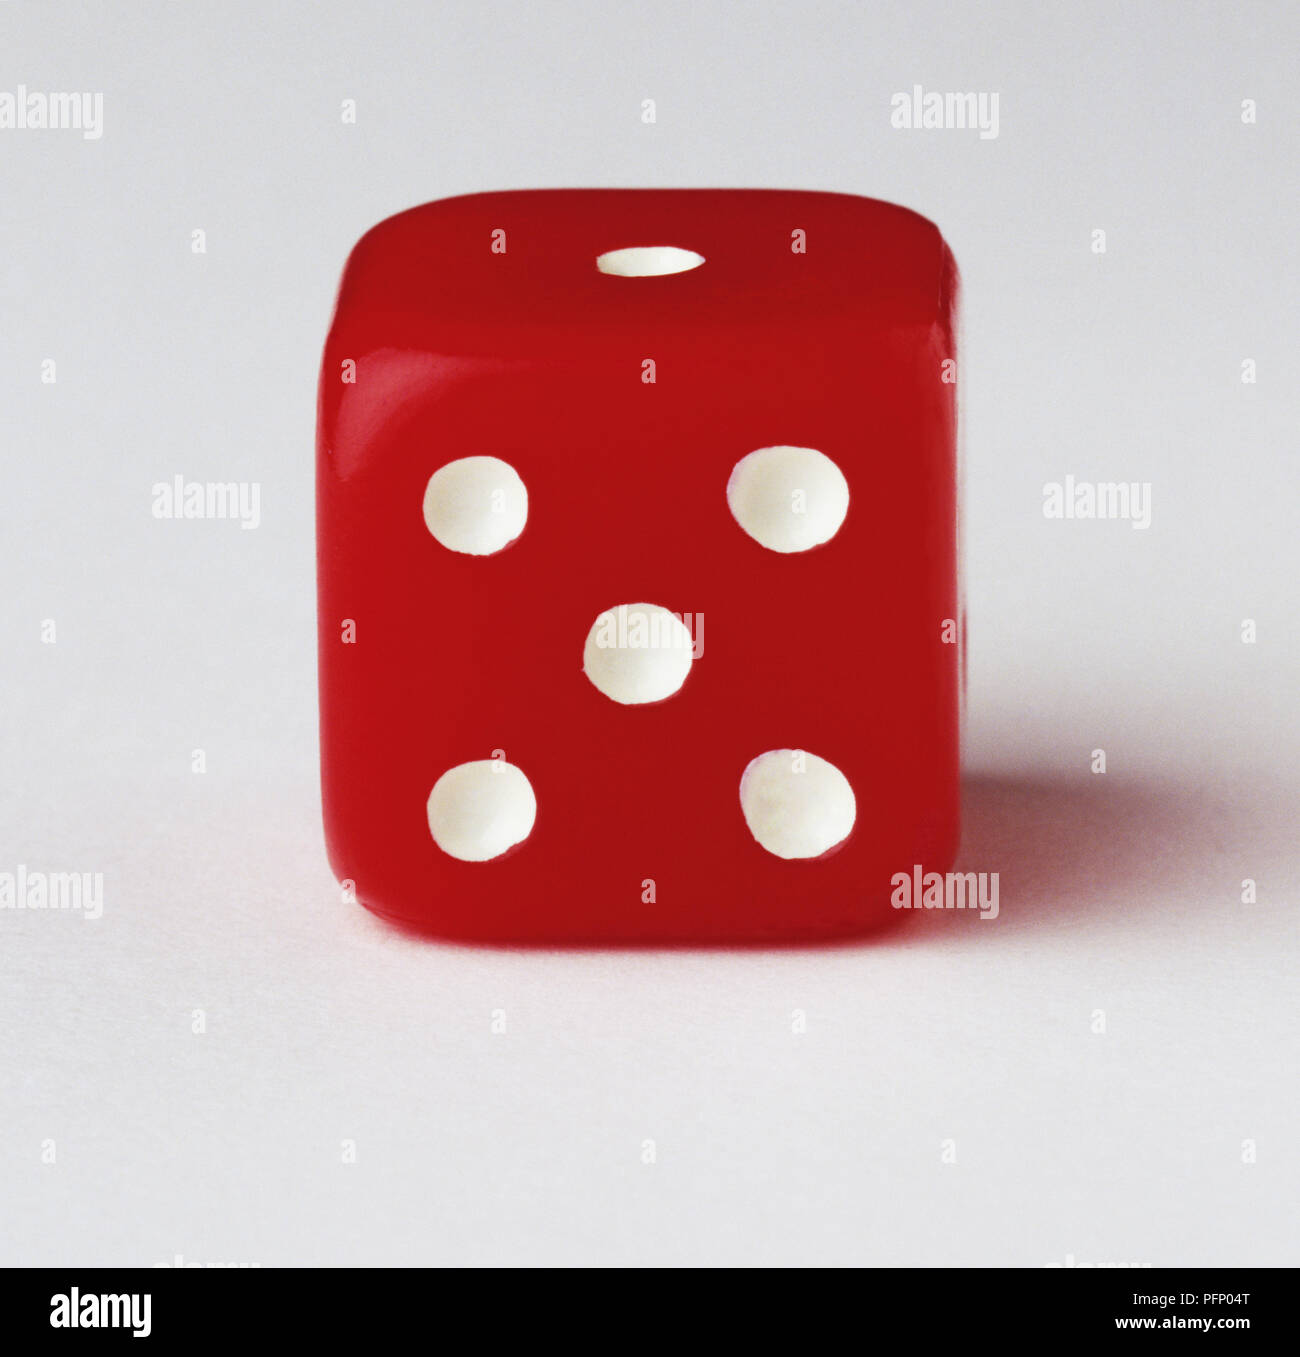 Red dice with five-dot side facing the camera, close up Stock Photo